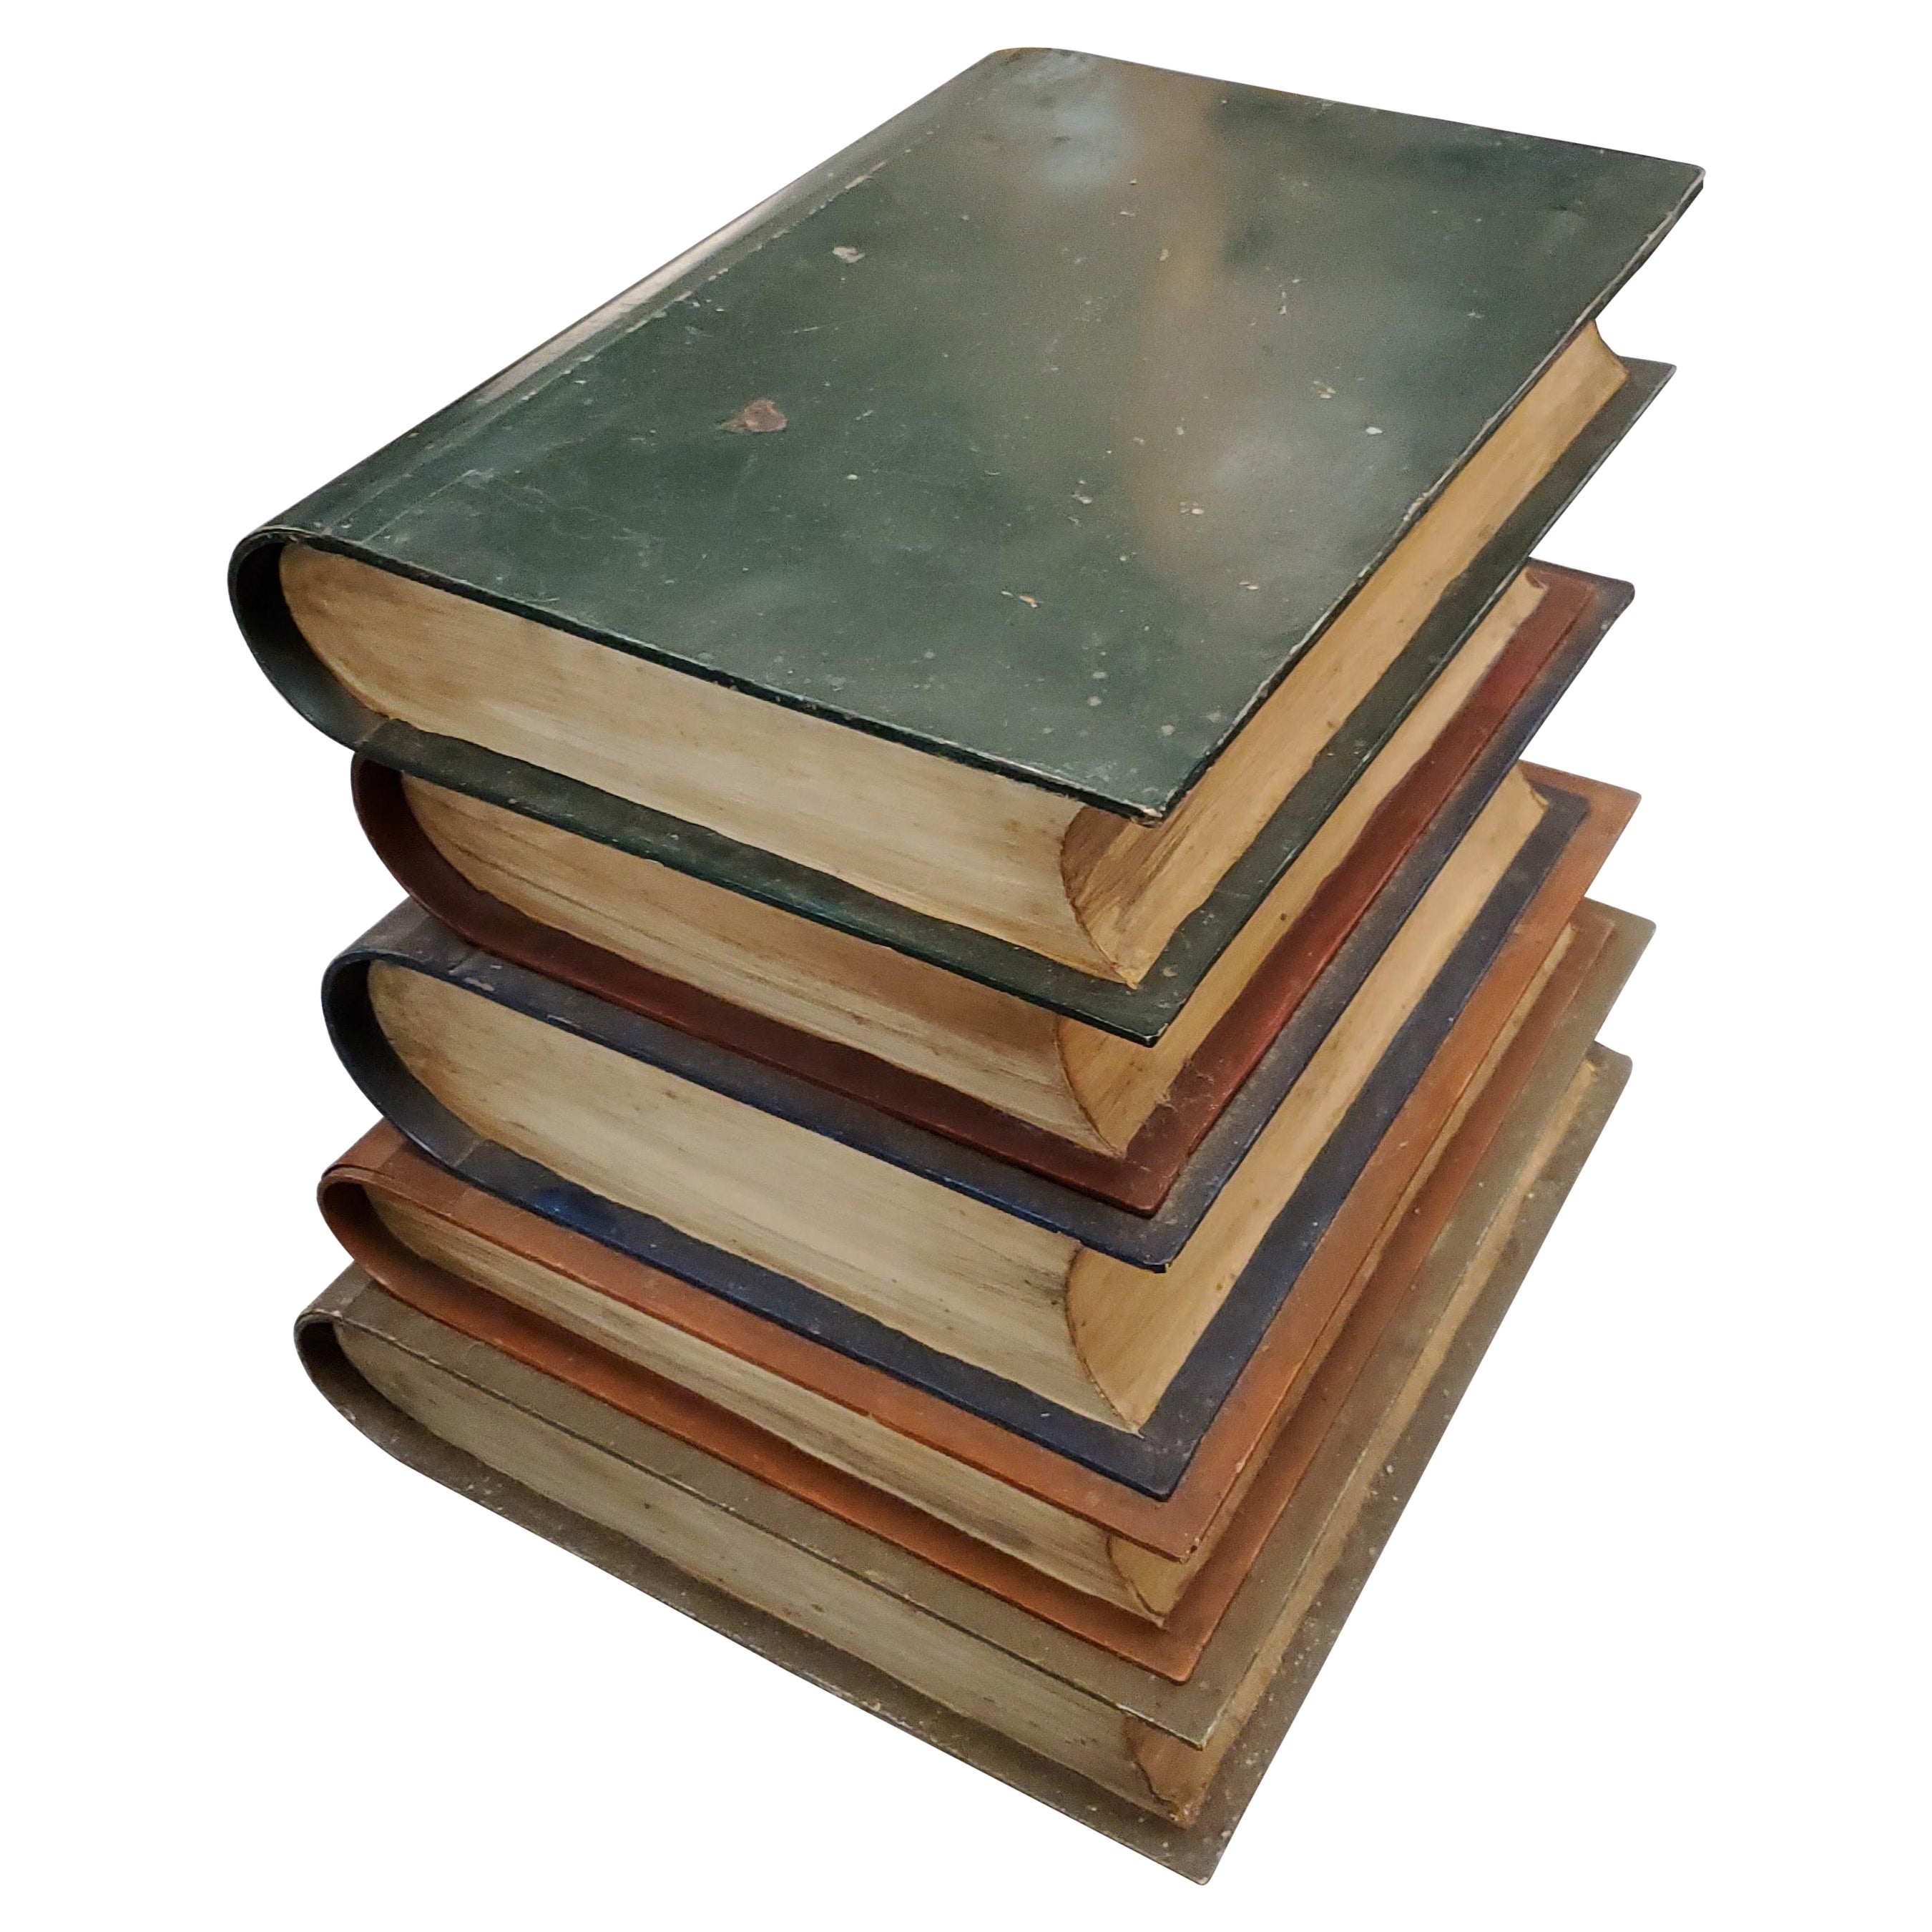 Late 19th Century Painted Metal Table in Book Stack Form